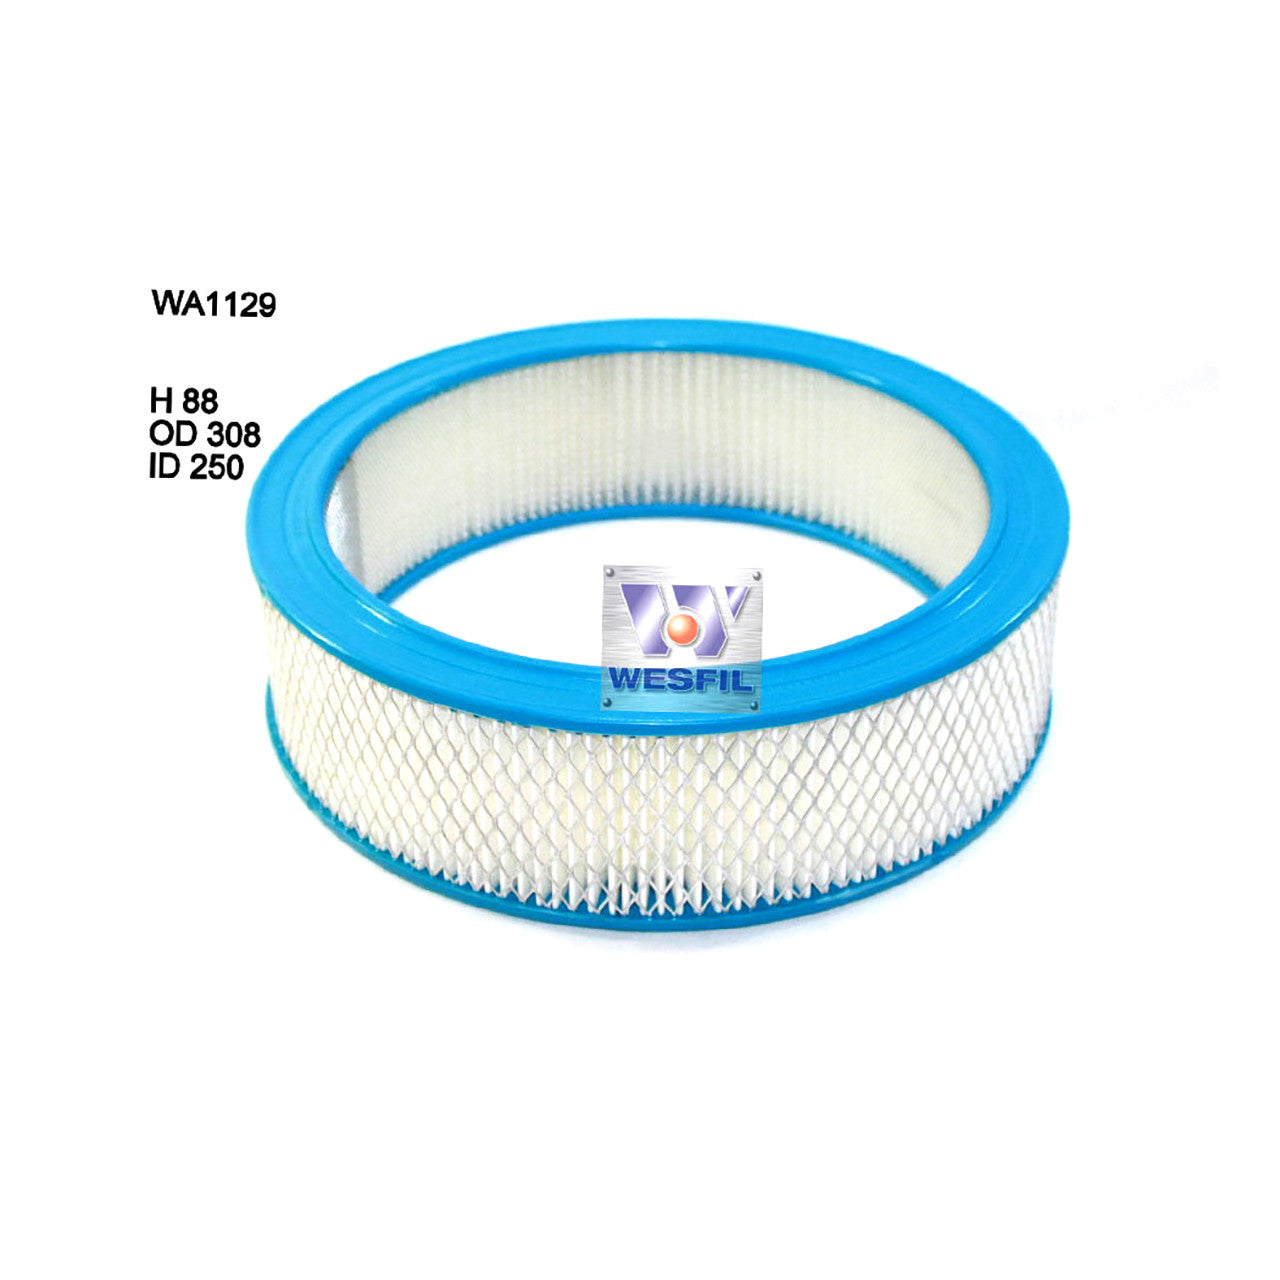 WA1129 Wesfil Air Filter for Chevrolet (Cross Ref: A148)